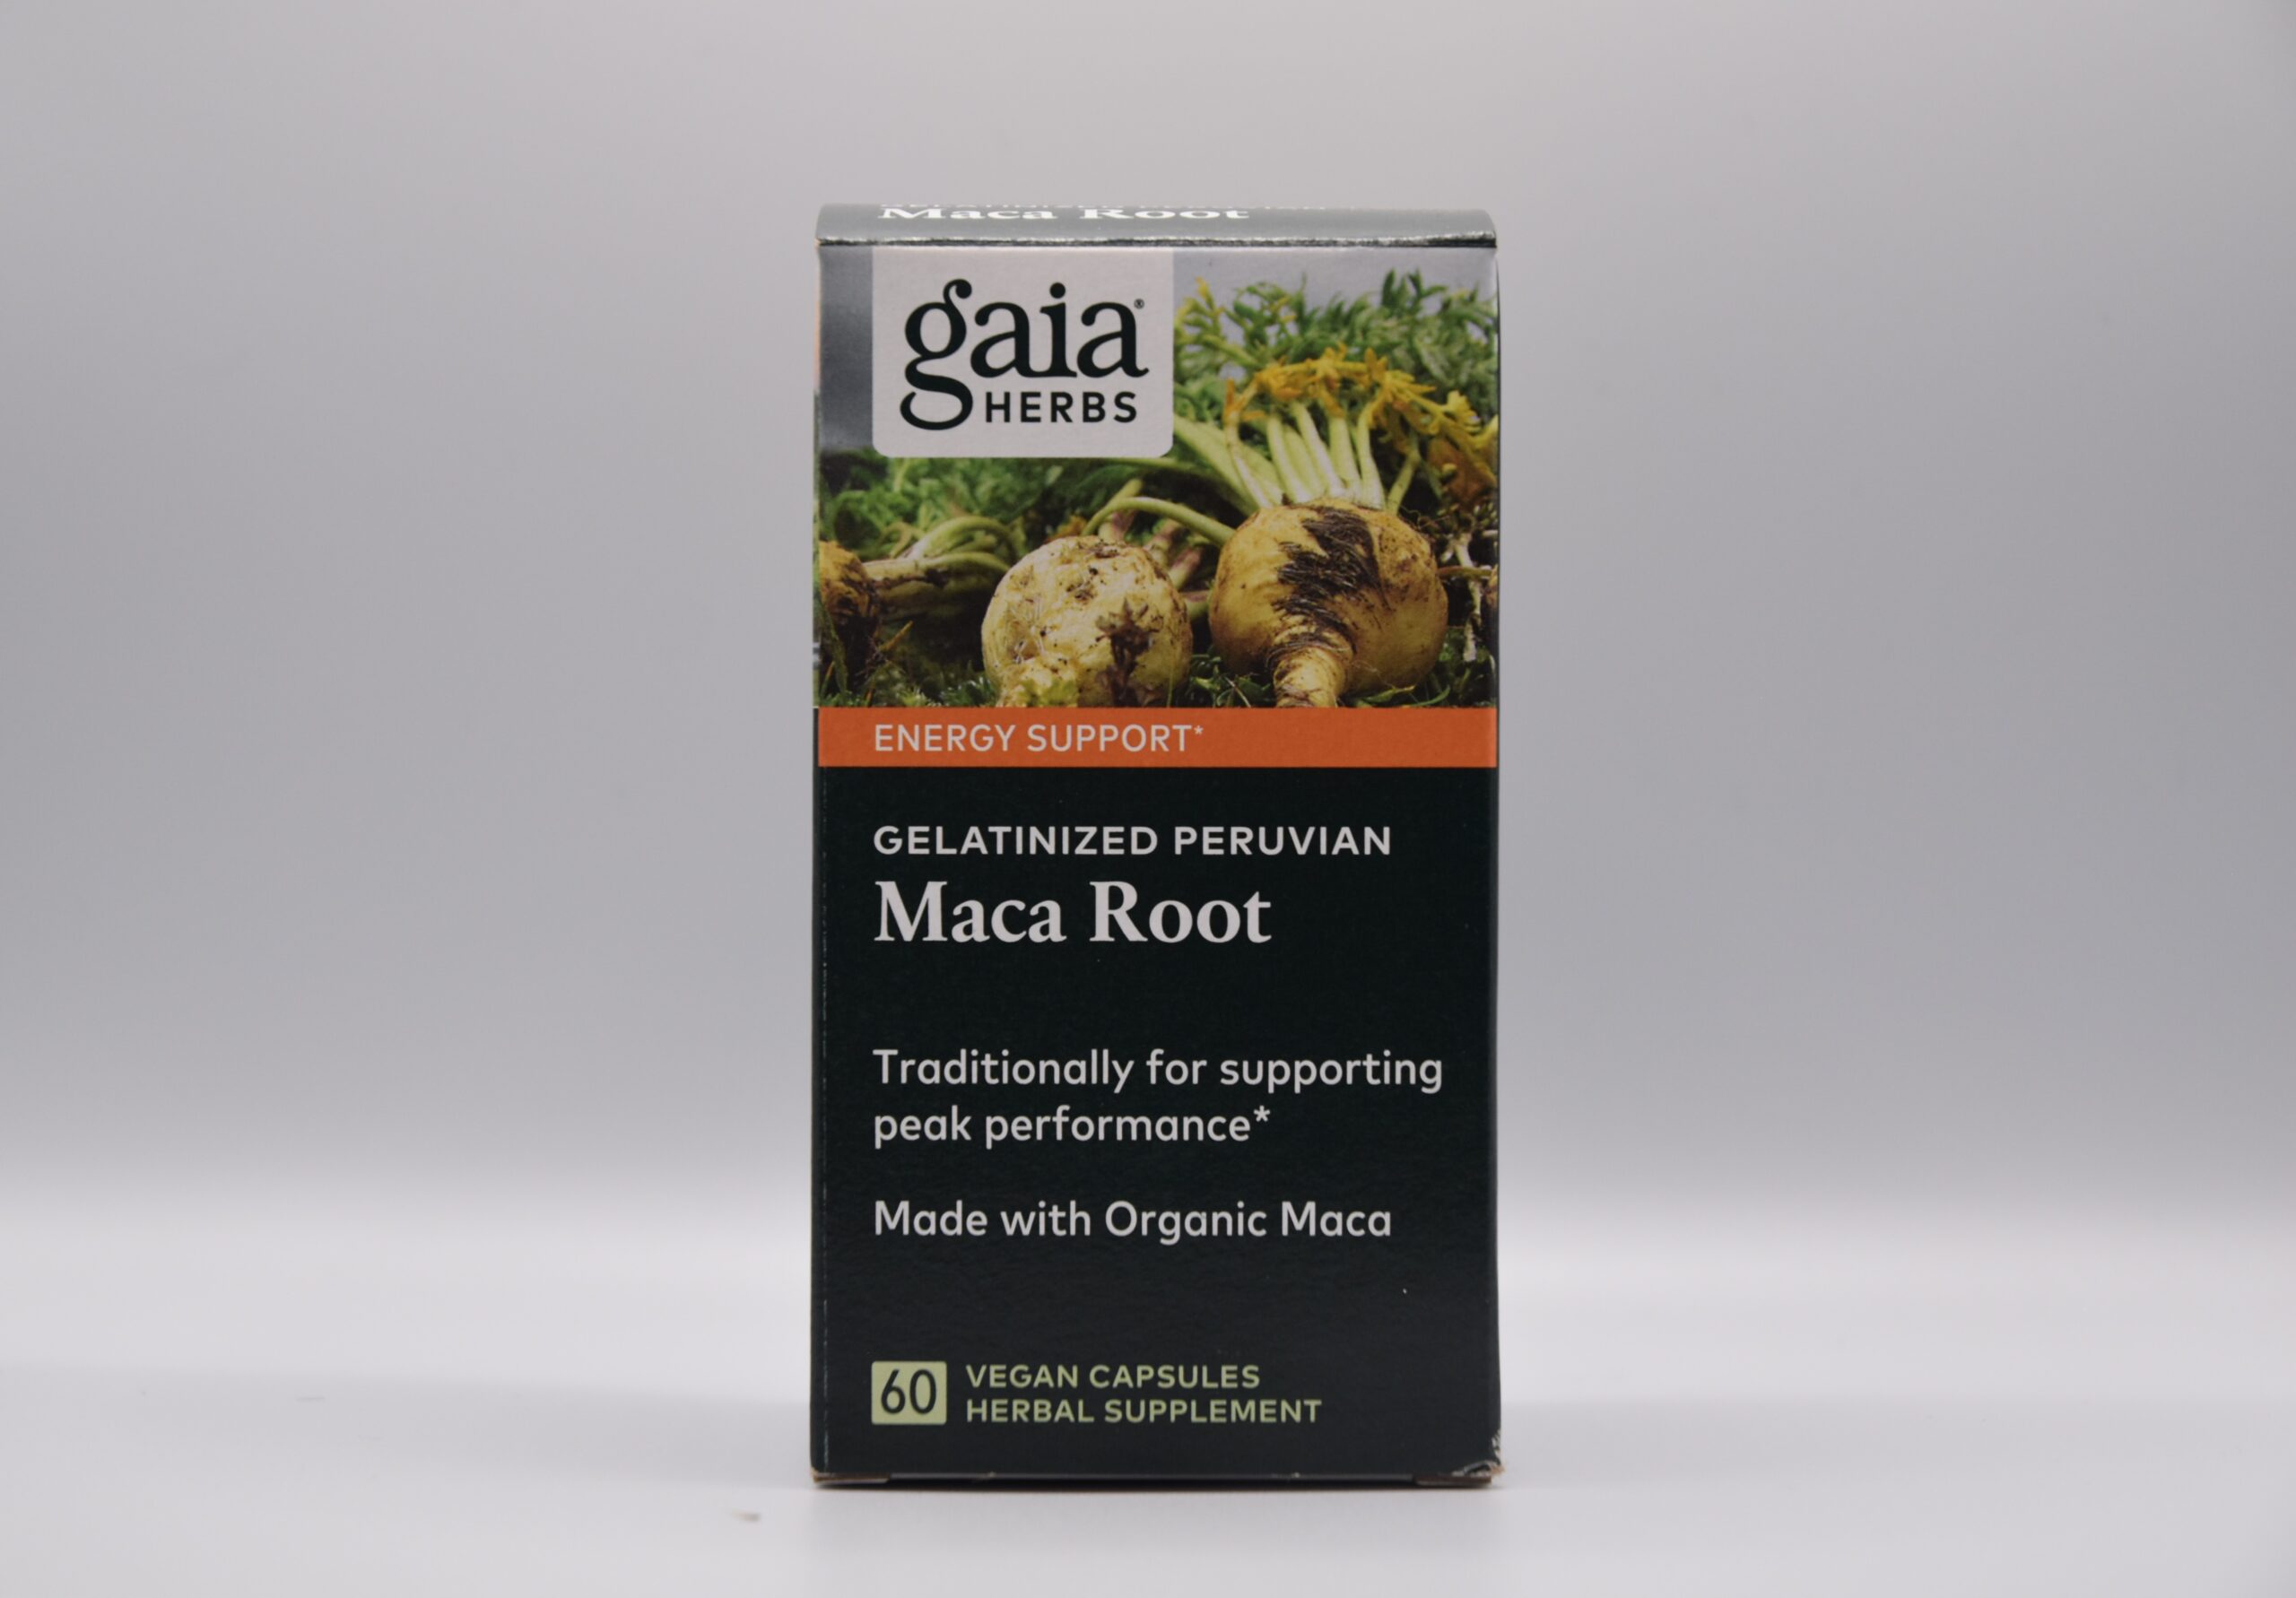 A box of Maca Root - 60 Vegetarian Capsules with a label stating "energy support," and "traditionally for supporting peak performance," containing 60 vegan capsules and made with organic maca.